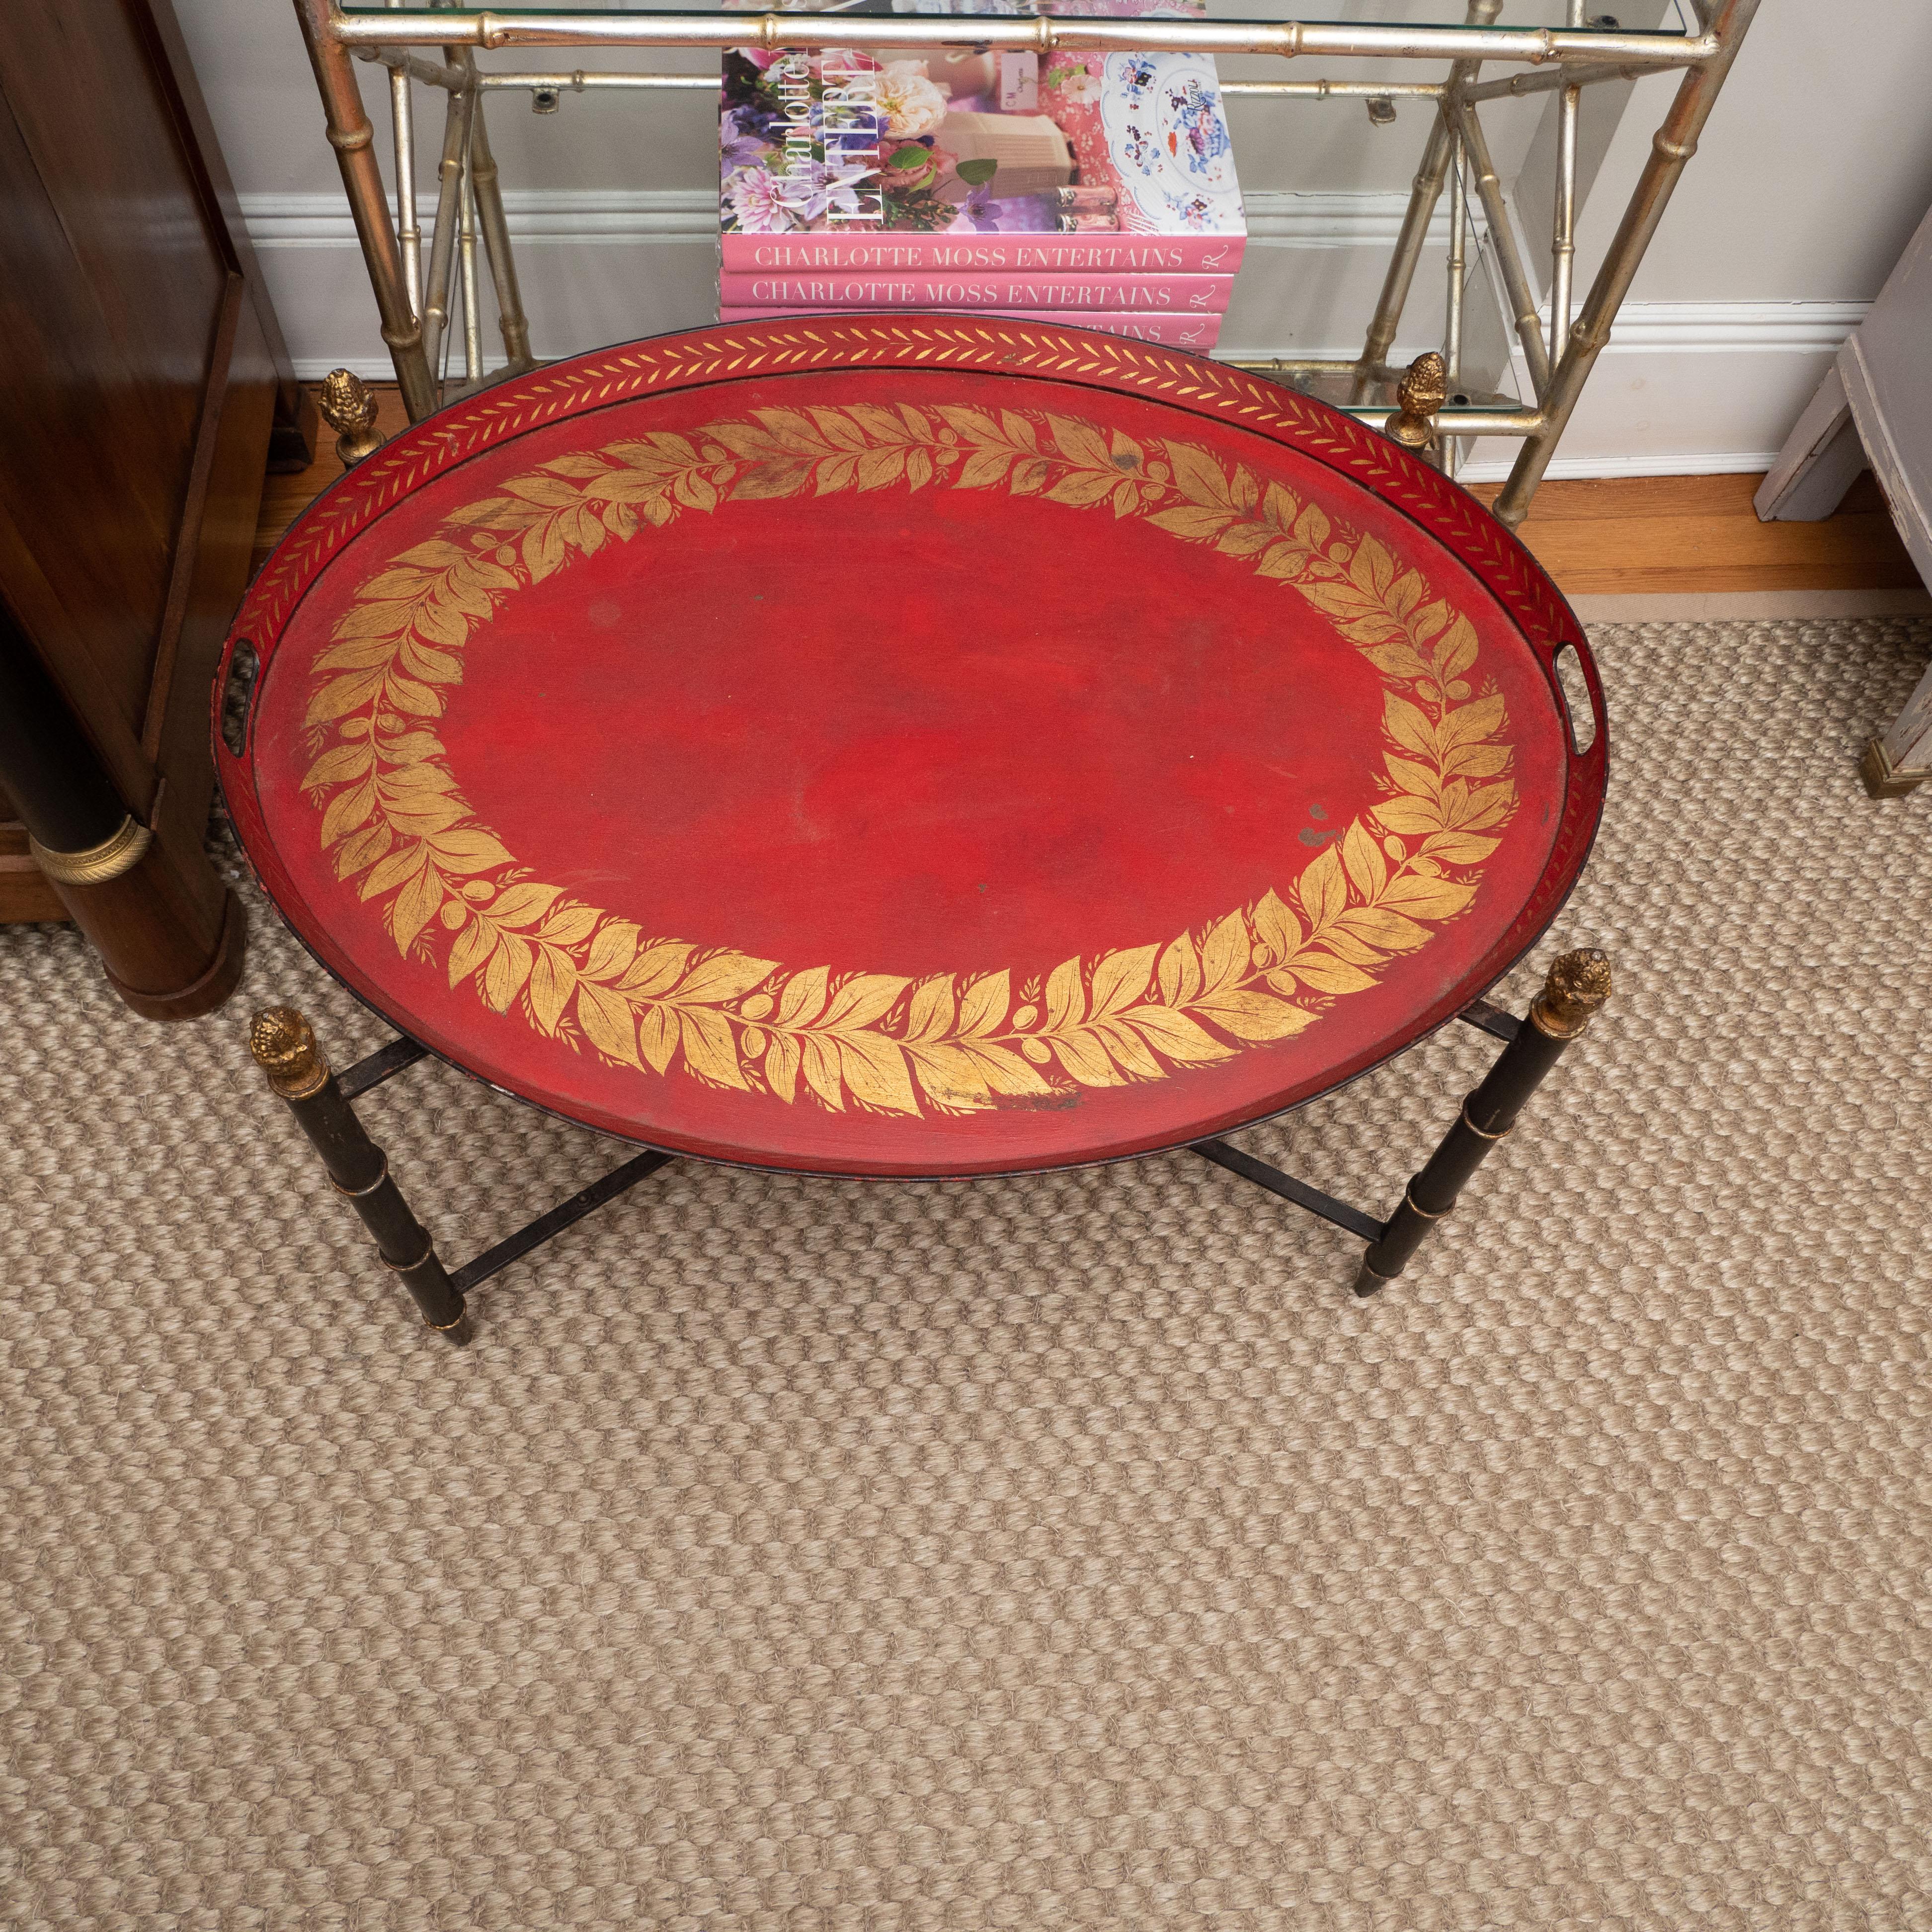 A lovely tole tray with a gallery in a custom stand. The tray, painted in a rich red, features a design painted in gold on top and sides. The X-frame stand has turned legs and acorn finials in gold. Perfect as a side table anywhere!